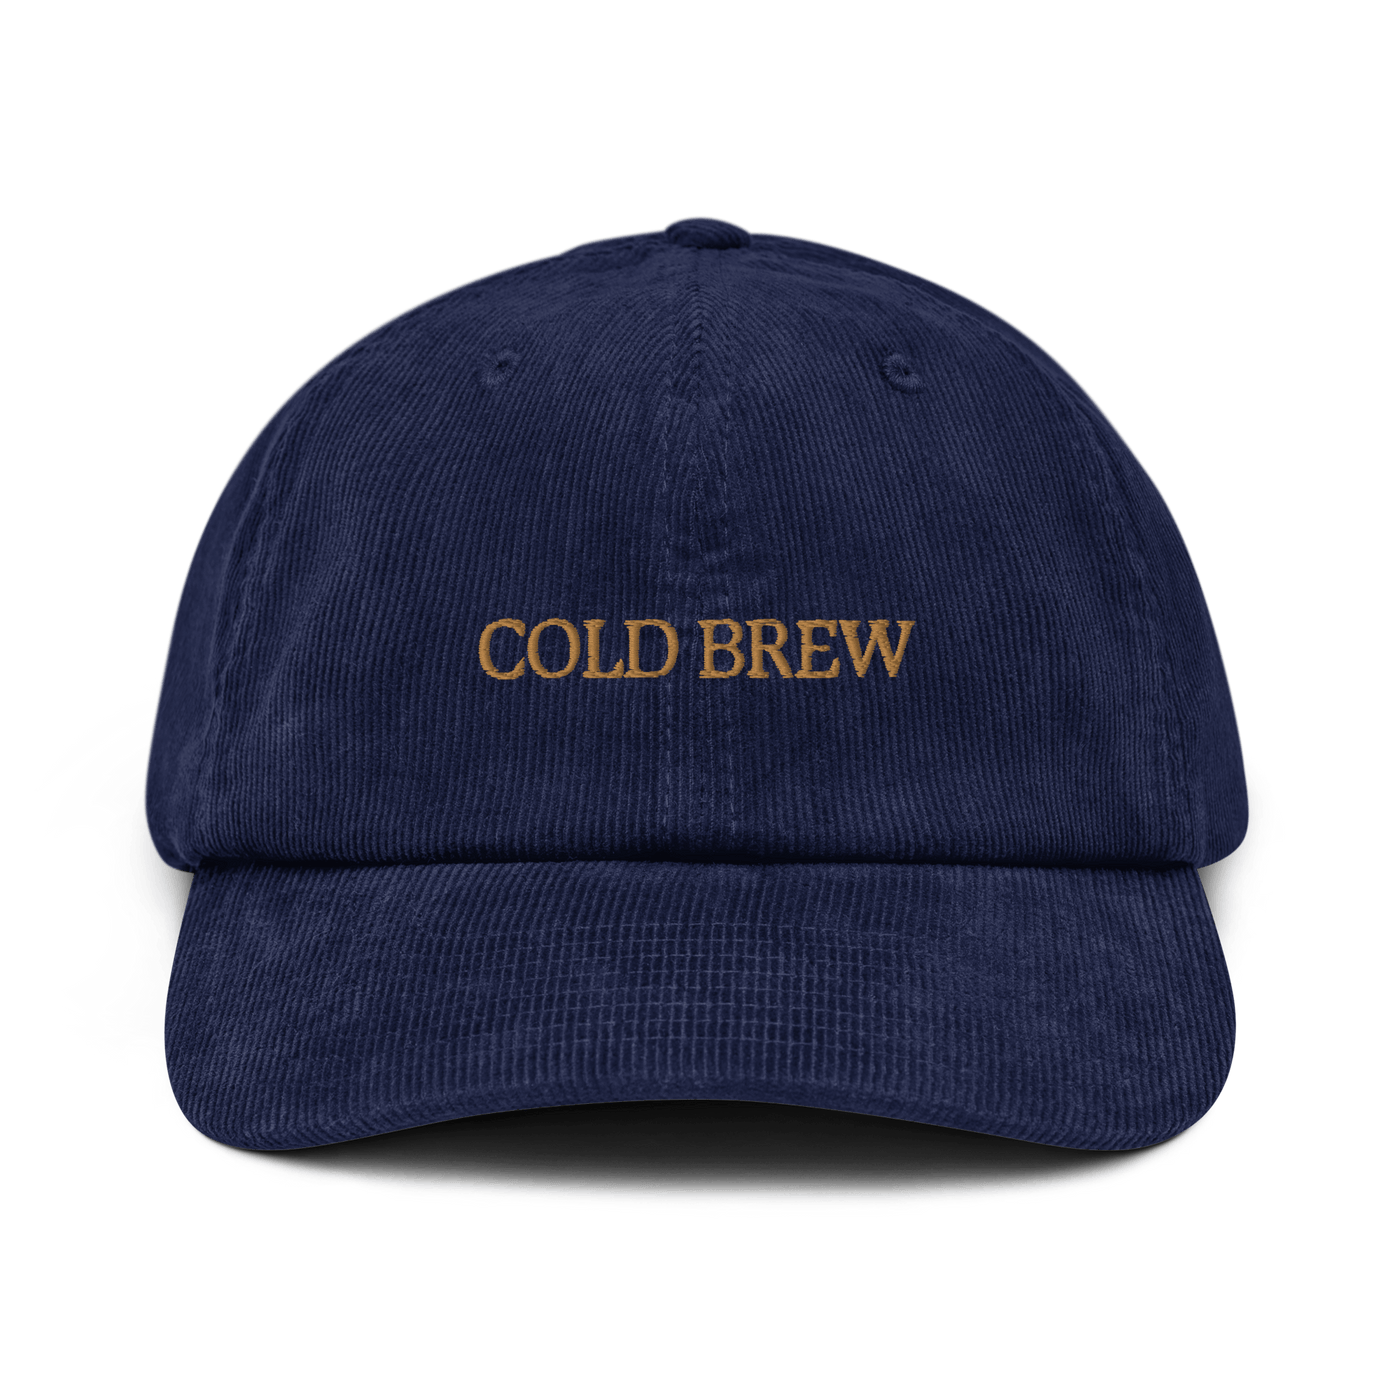 Cold Brew Corduroy hat - Oxford Navy - - Just Another Cap Store